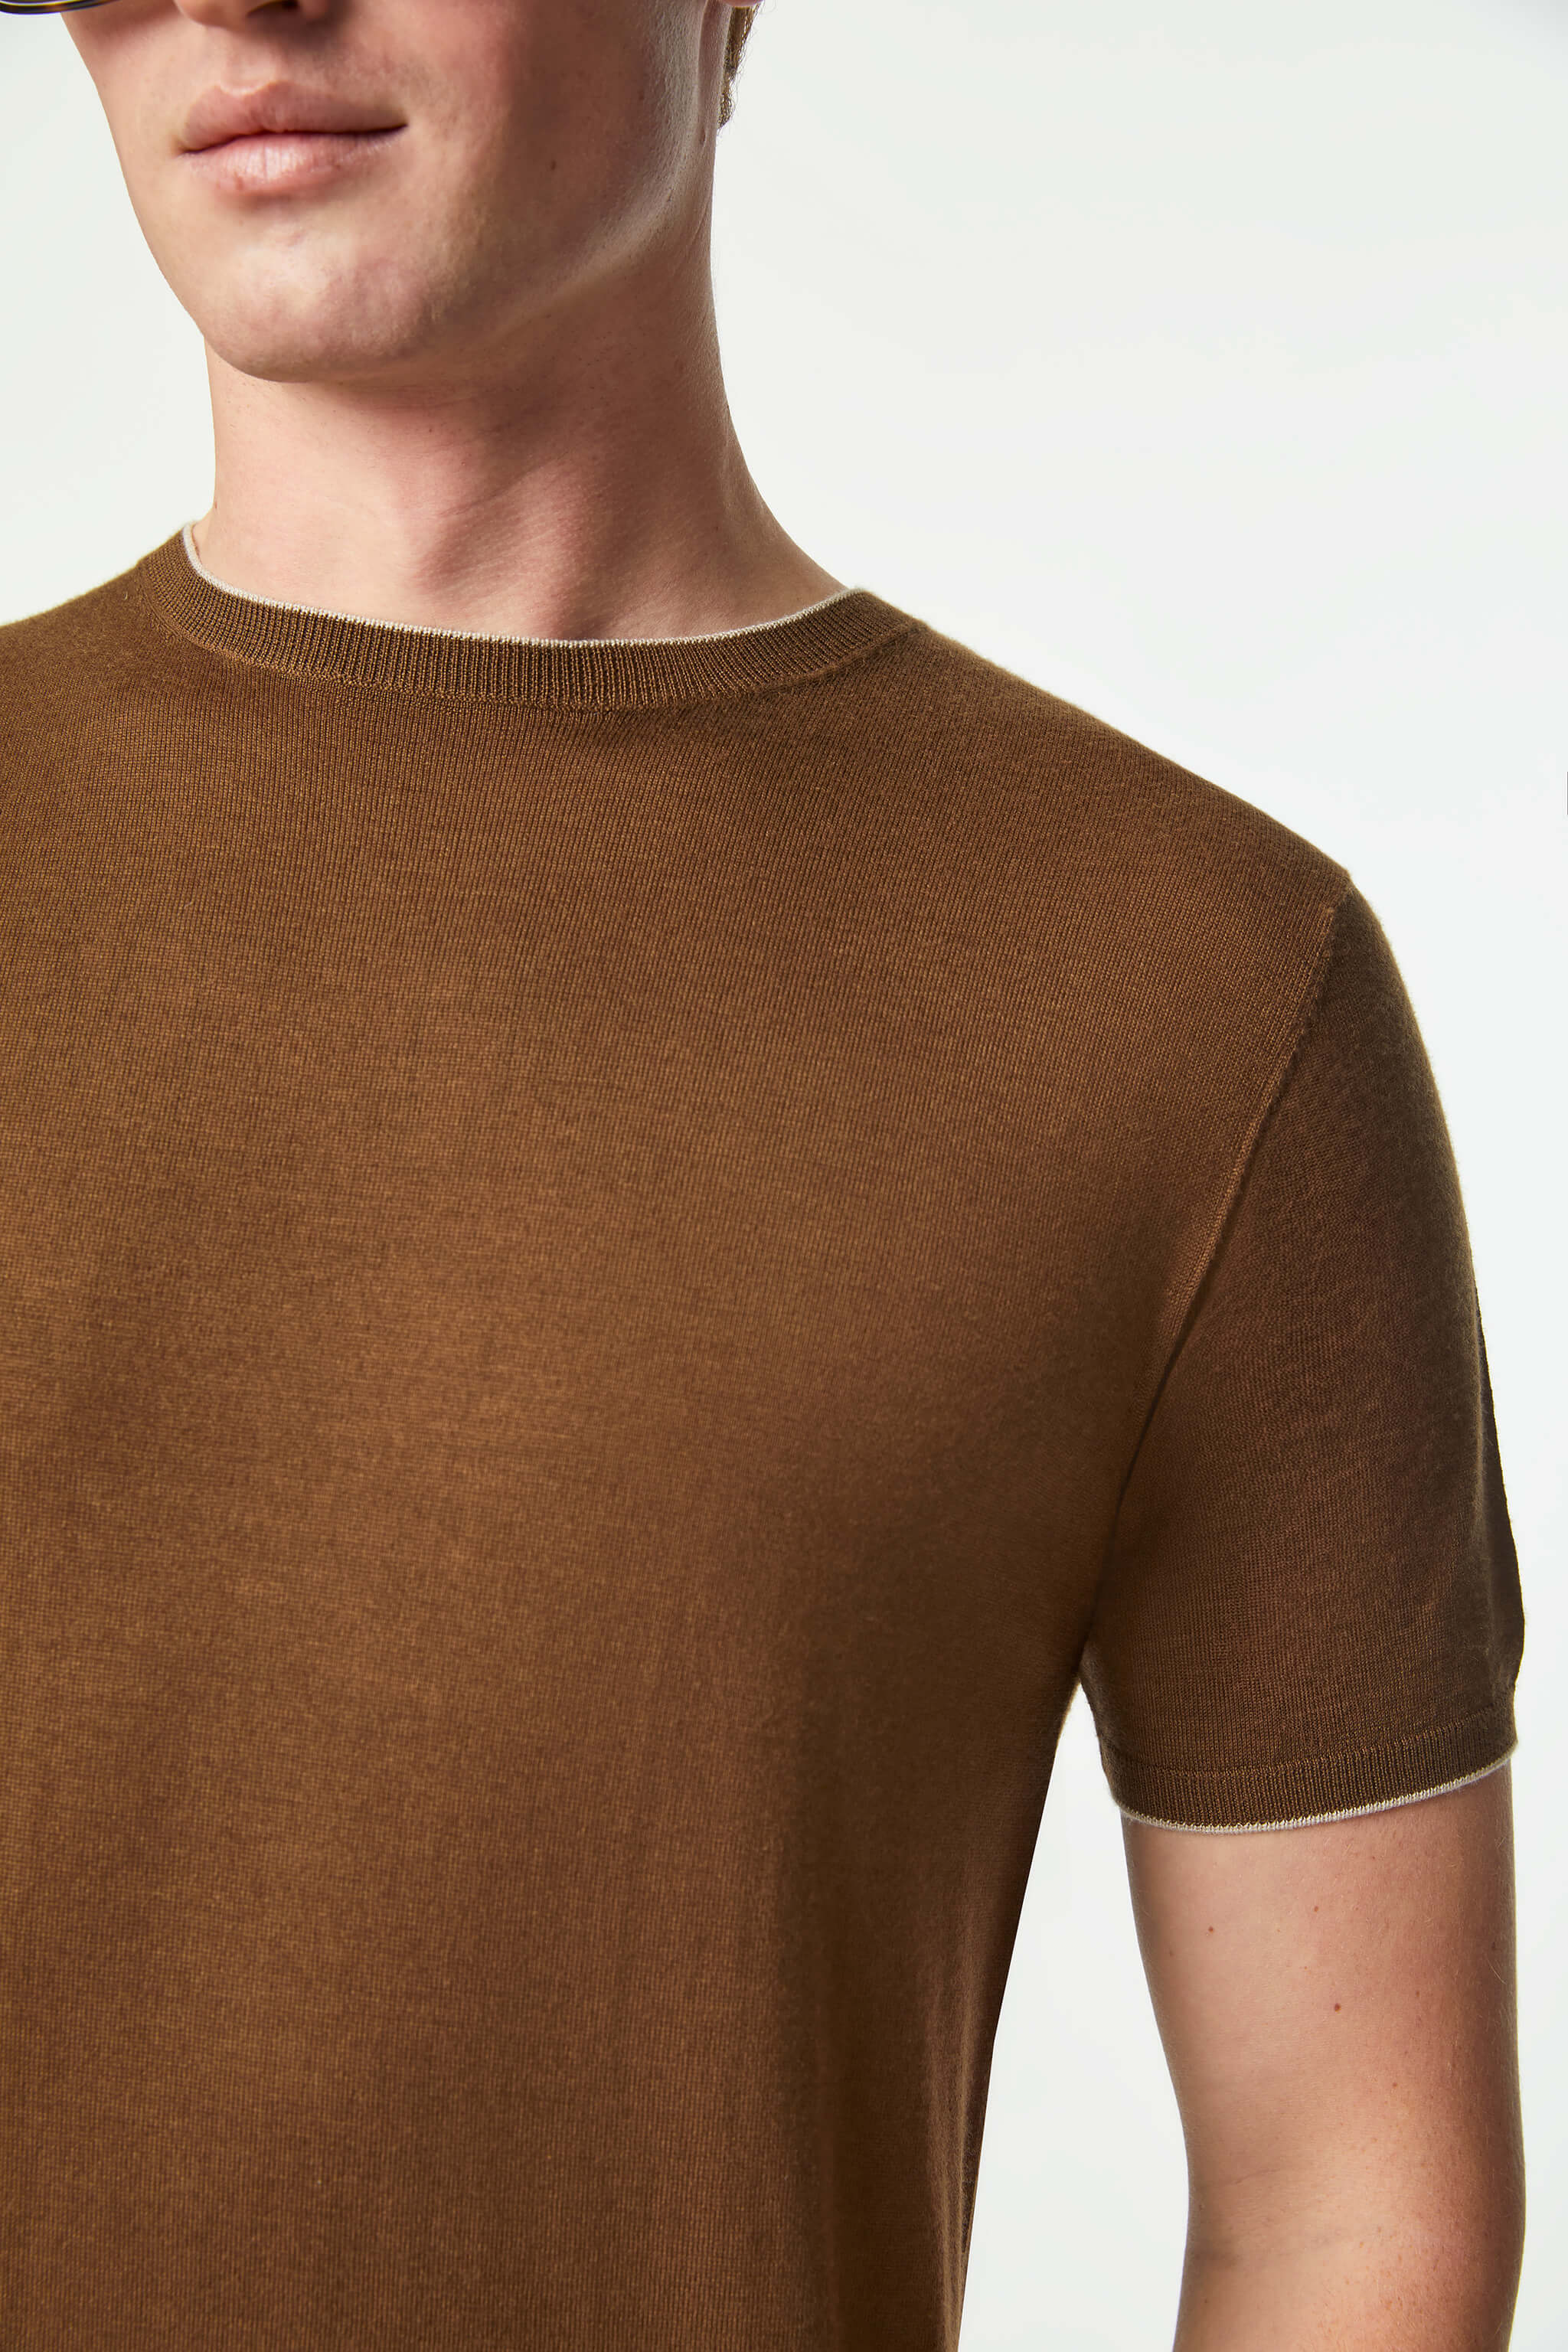 Short sleeve shirt with contrast Brown details